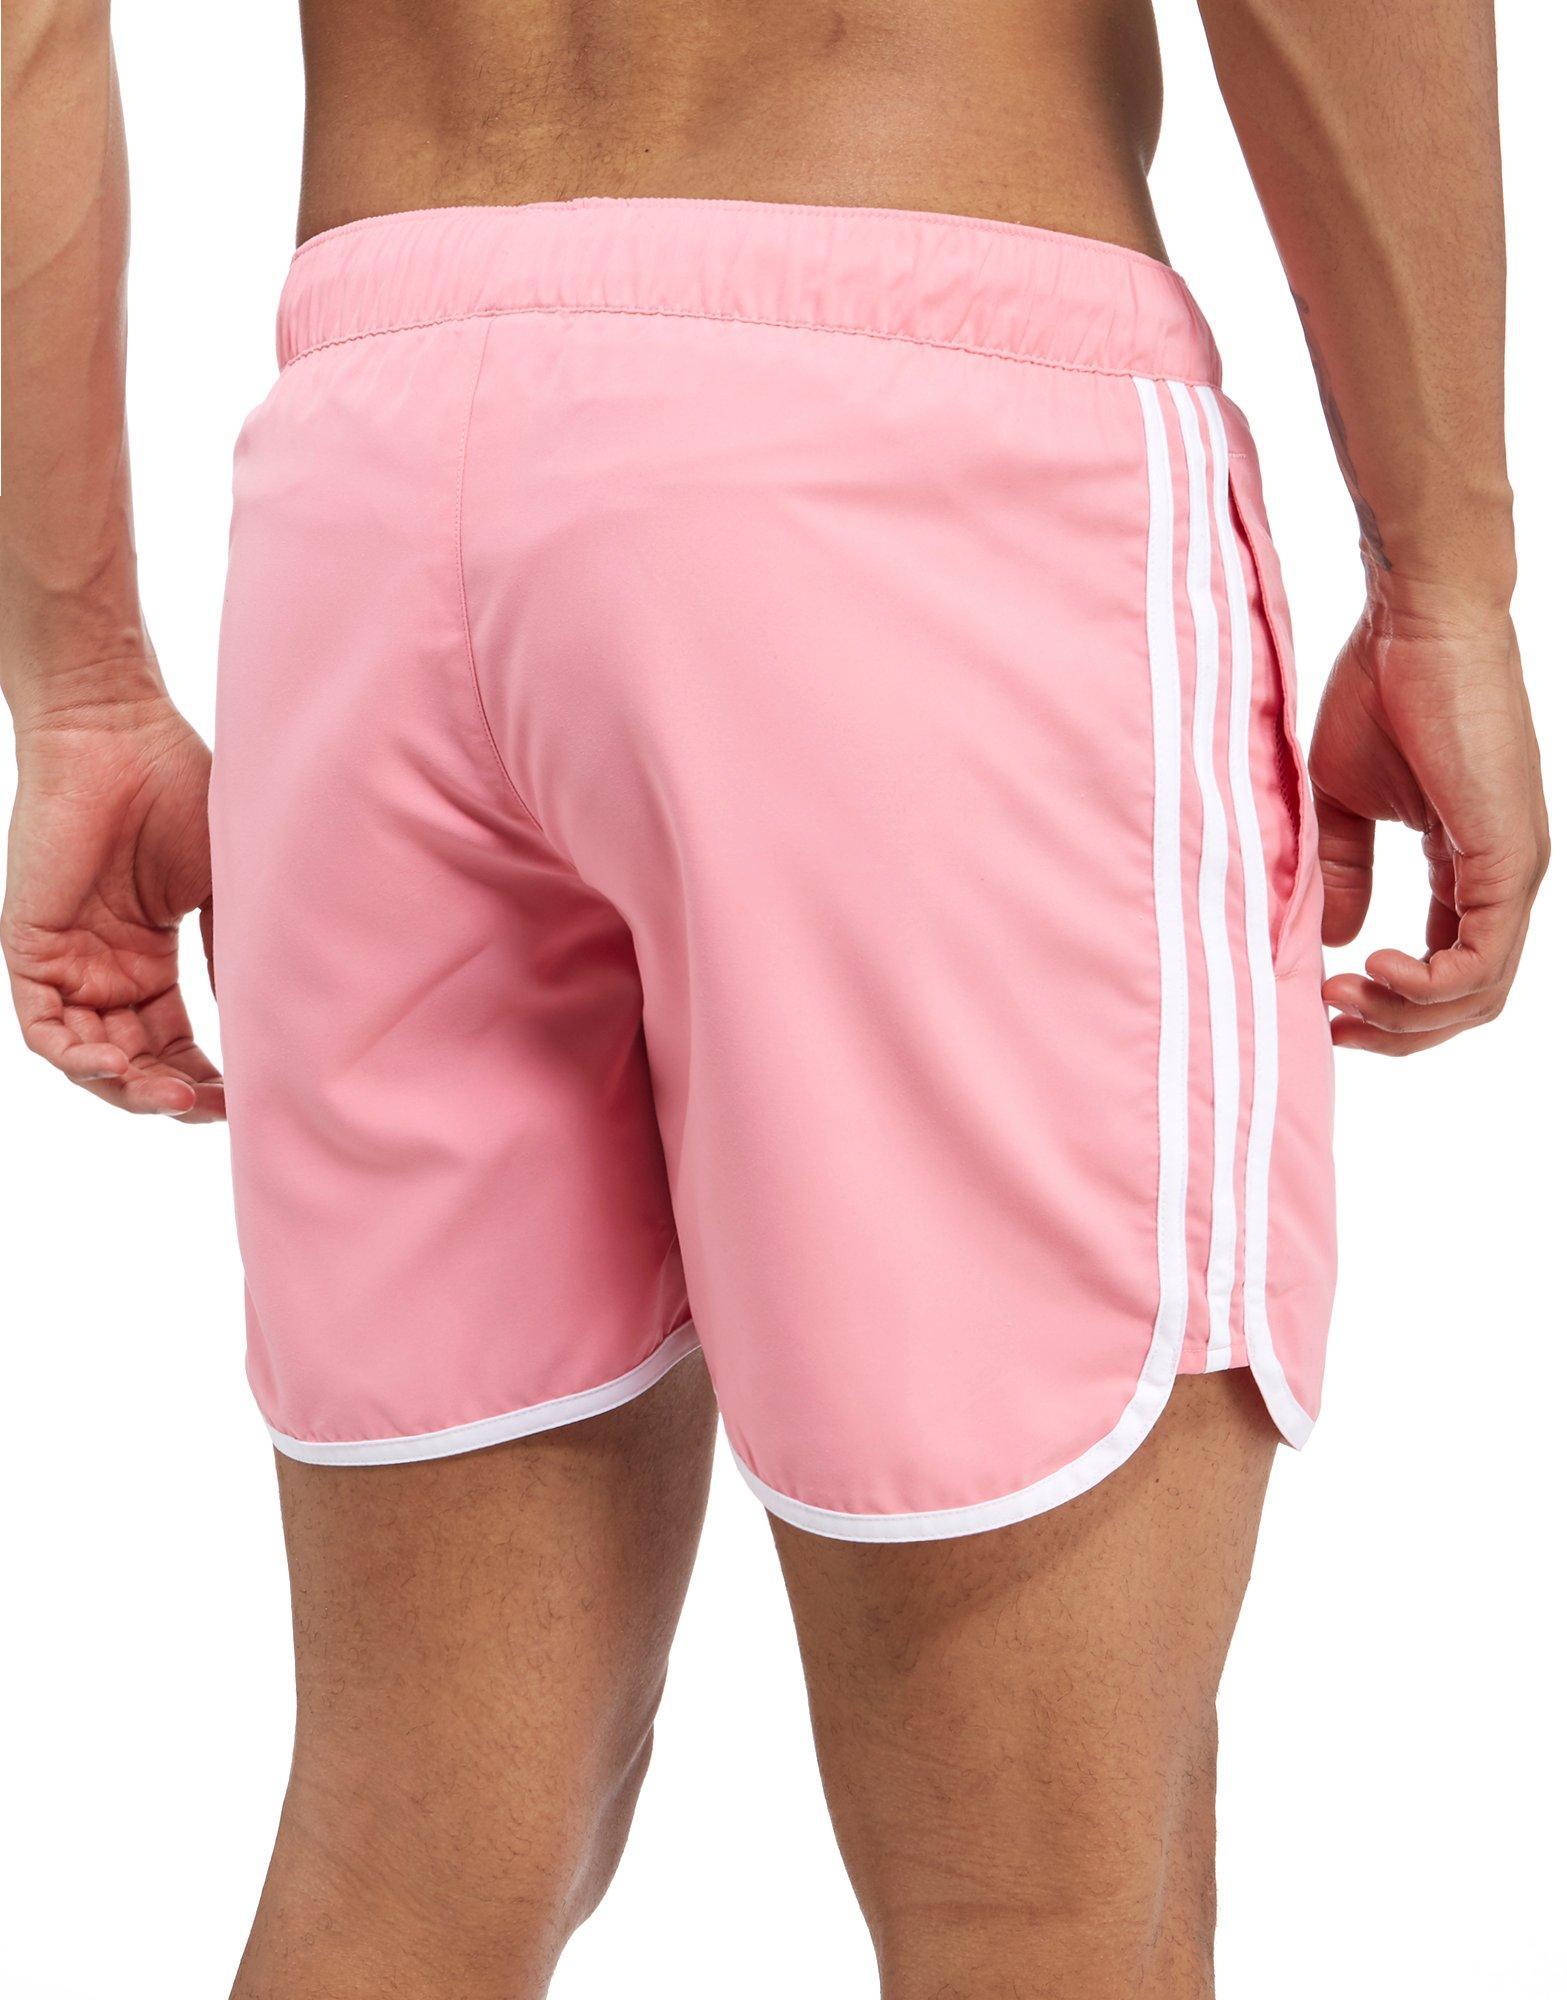 adidas Originals Synthetic Palm Shorts in Pink/White (Pink) for Men - Lyst